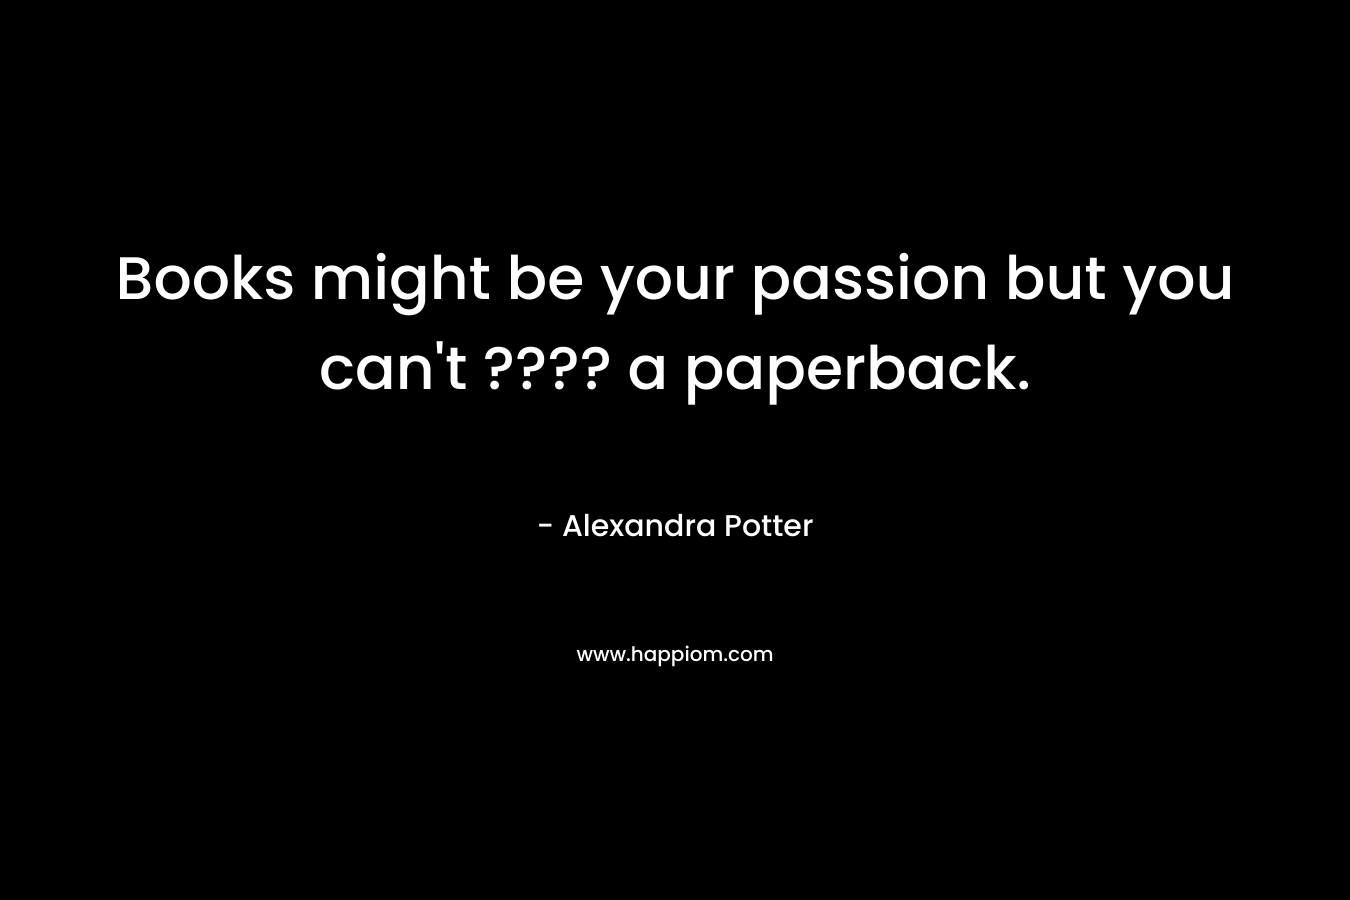 Books might be your passion but you can't ???? a paperback.